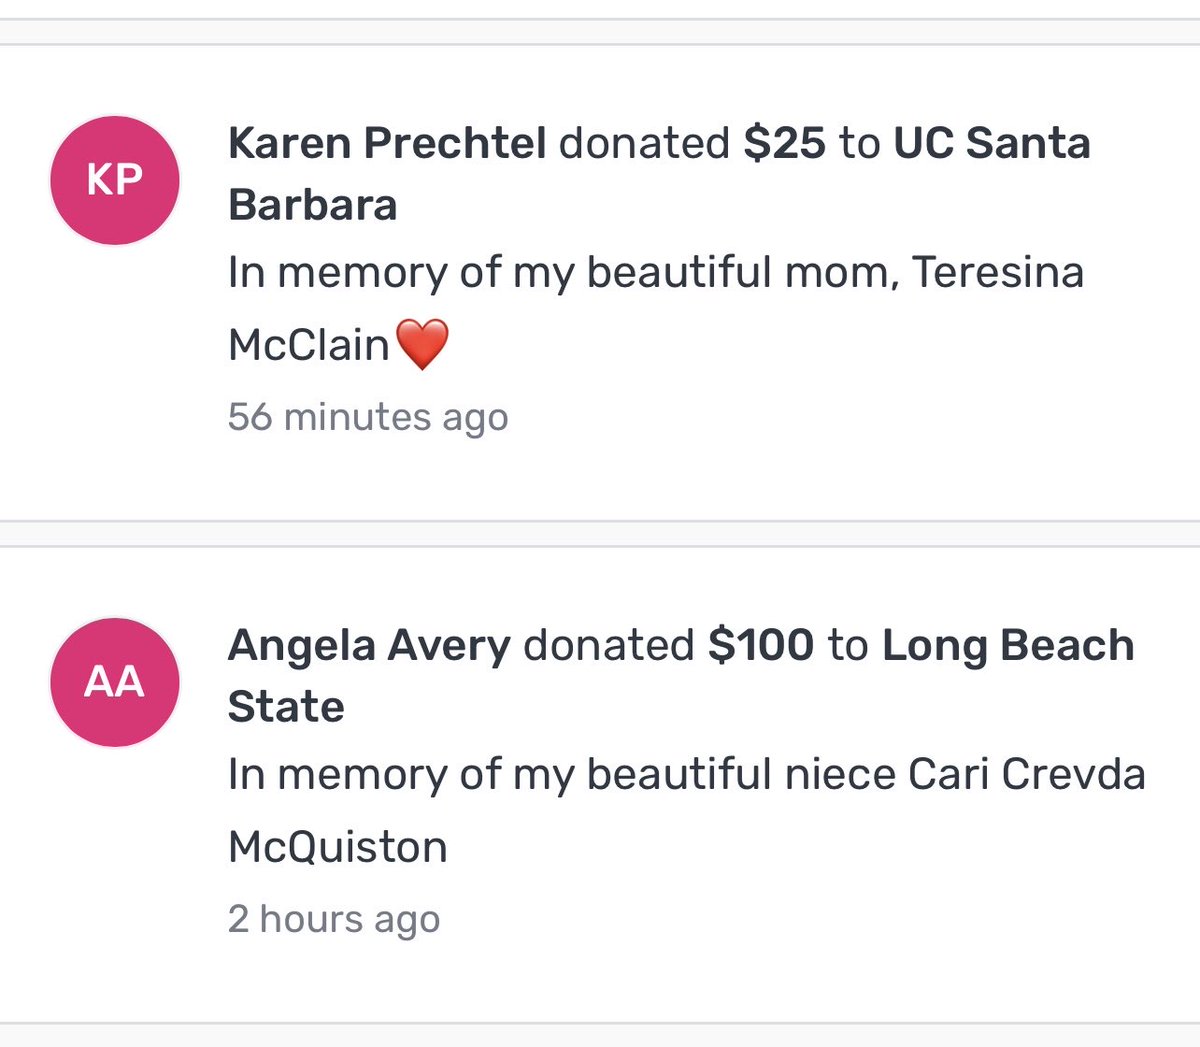 I love that Big West fans, family & friends are contributing In Memory Of. What a wonderful way to honor & remember. This is why we raise money and won’t stop. 🙏🏼🩷. Thank you Angela & Karen for your kindness and treasure. You’re making an impact. ⁦@BigWestSports⁩.